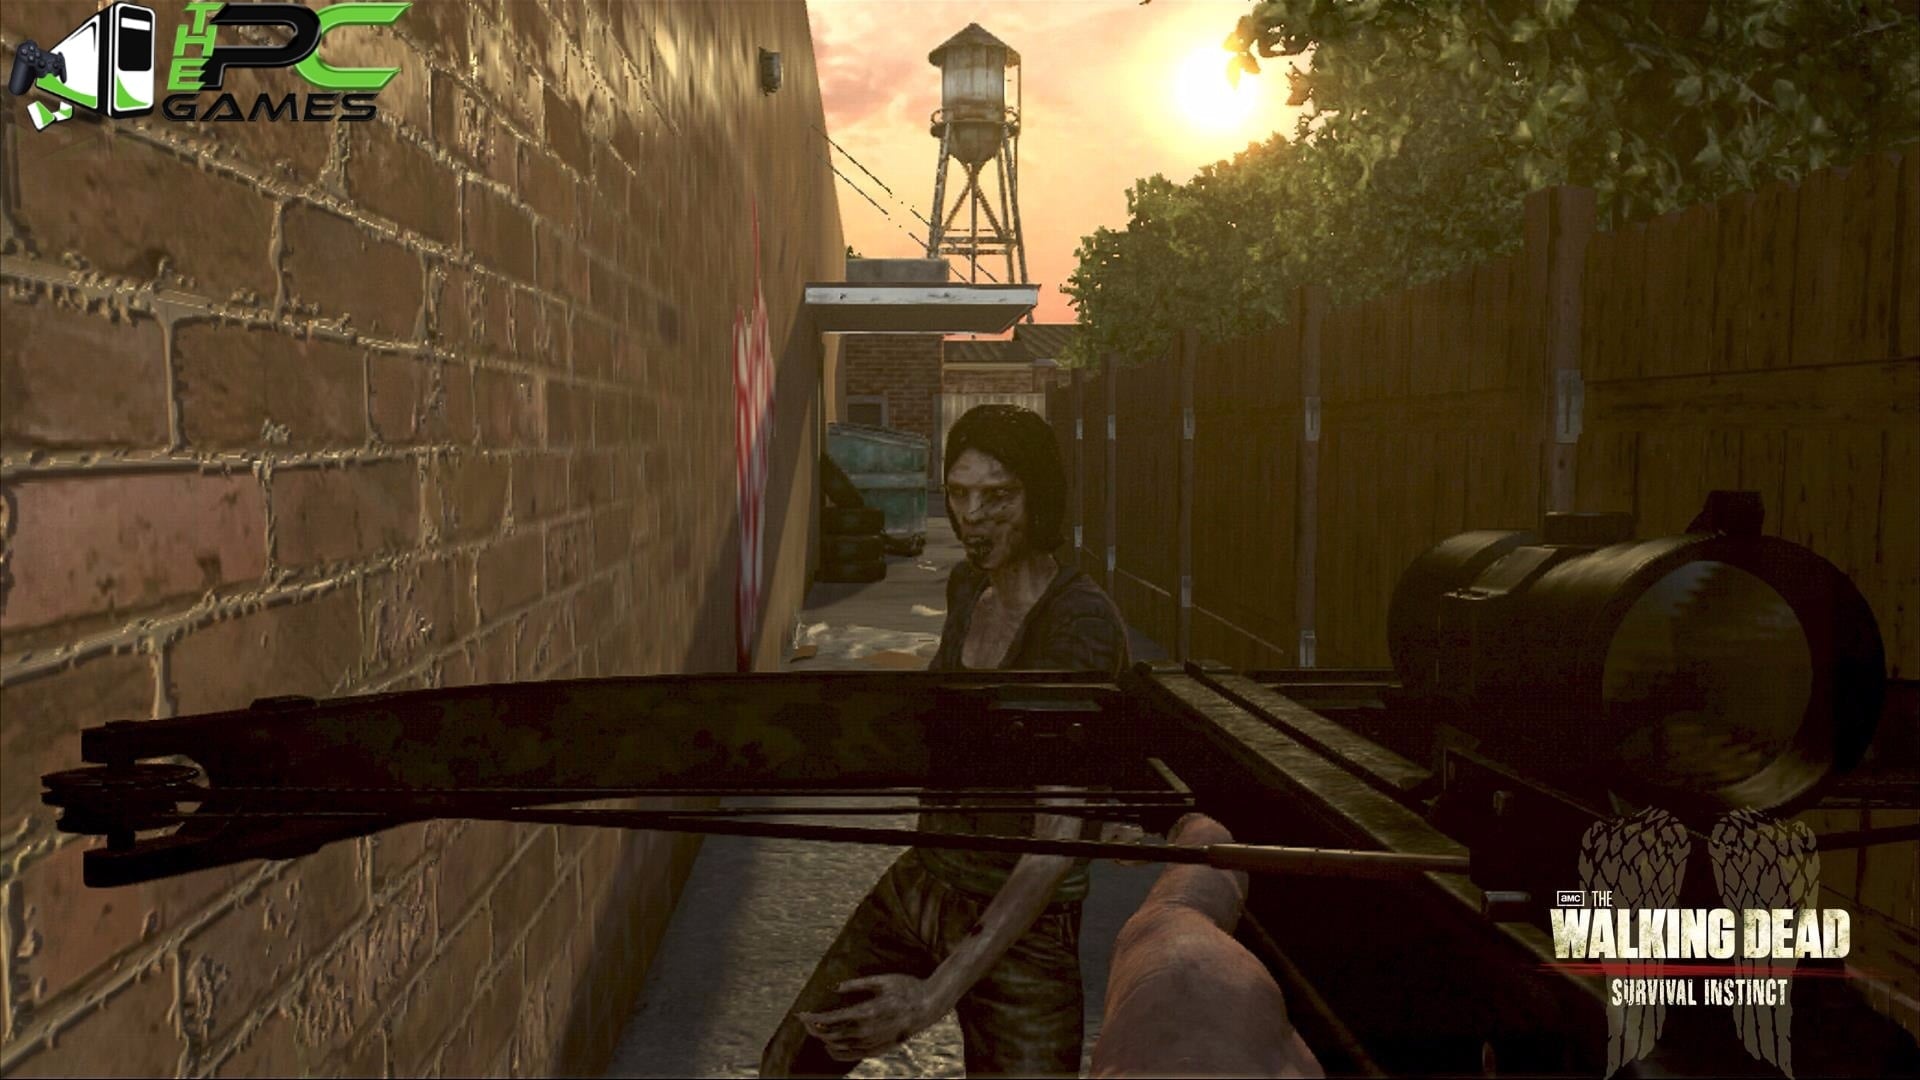 The walking dead free download game pc full